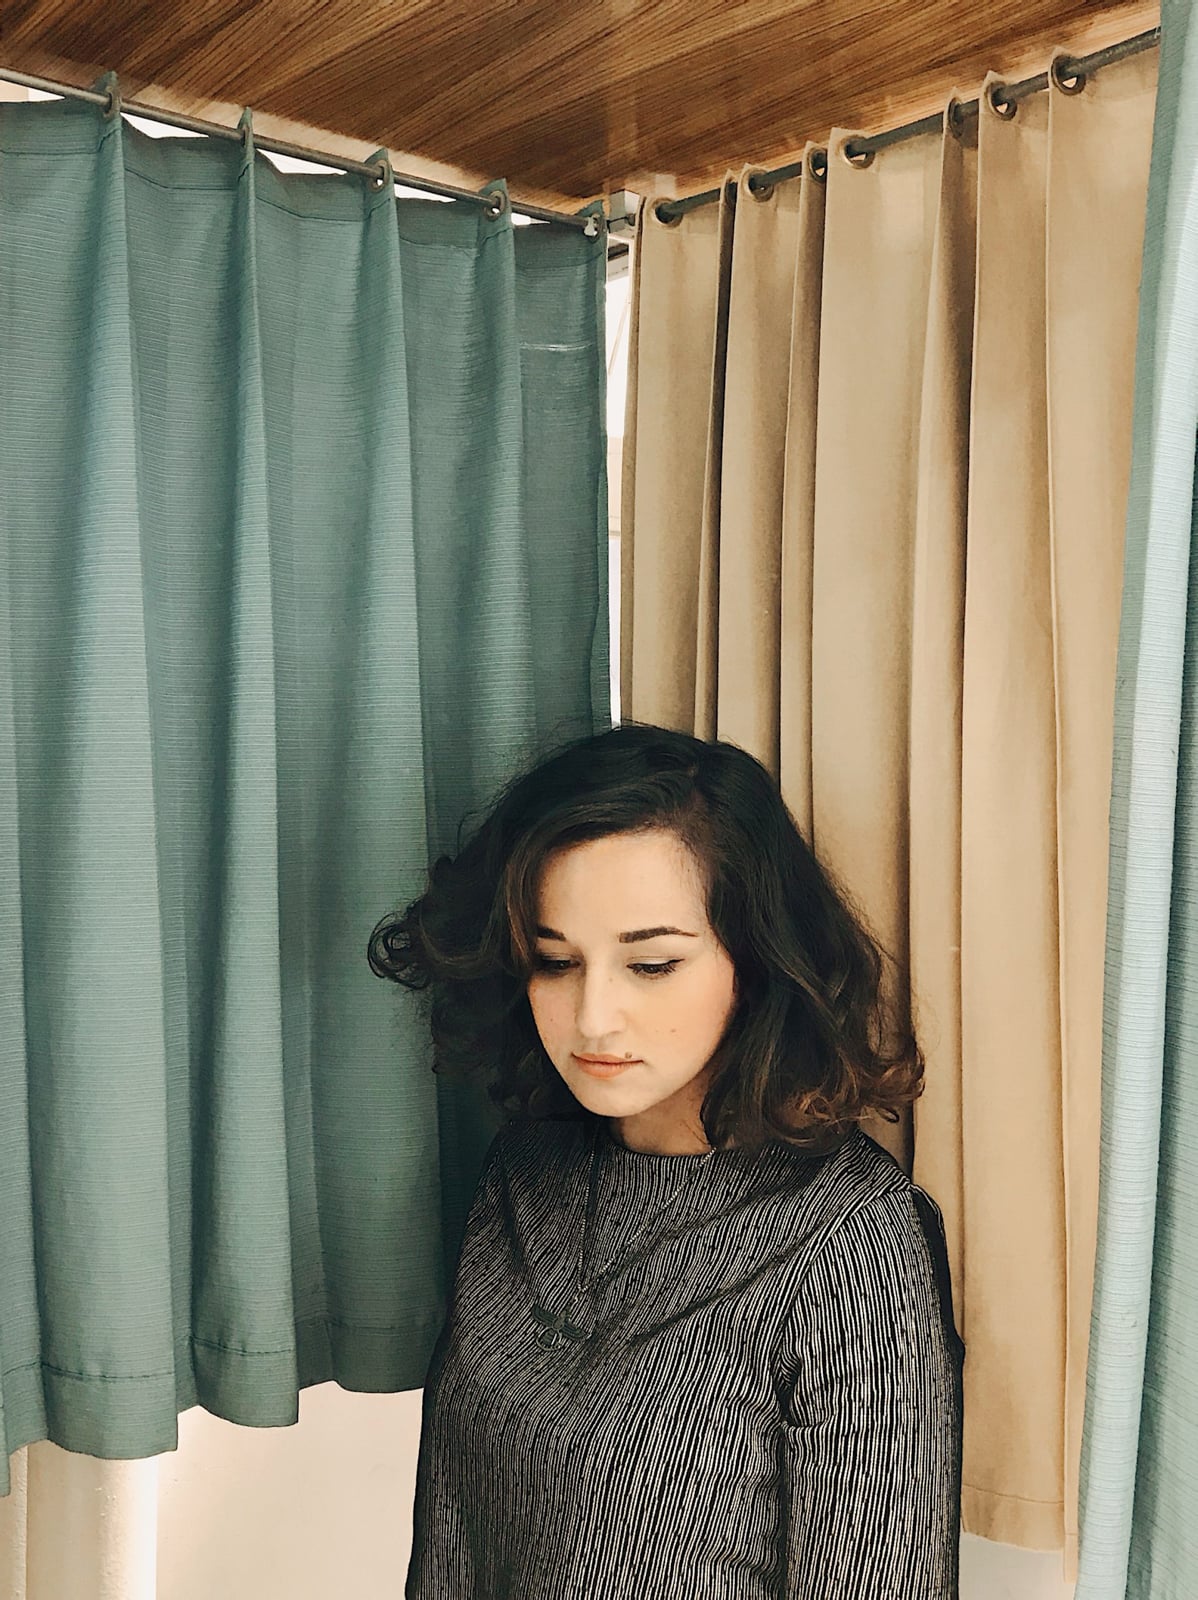 brown woman in gray sweater surrounded by blue and beige curtains of photo booth